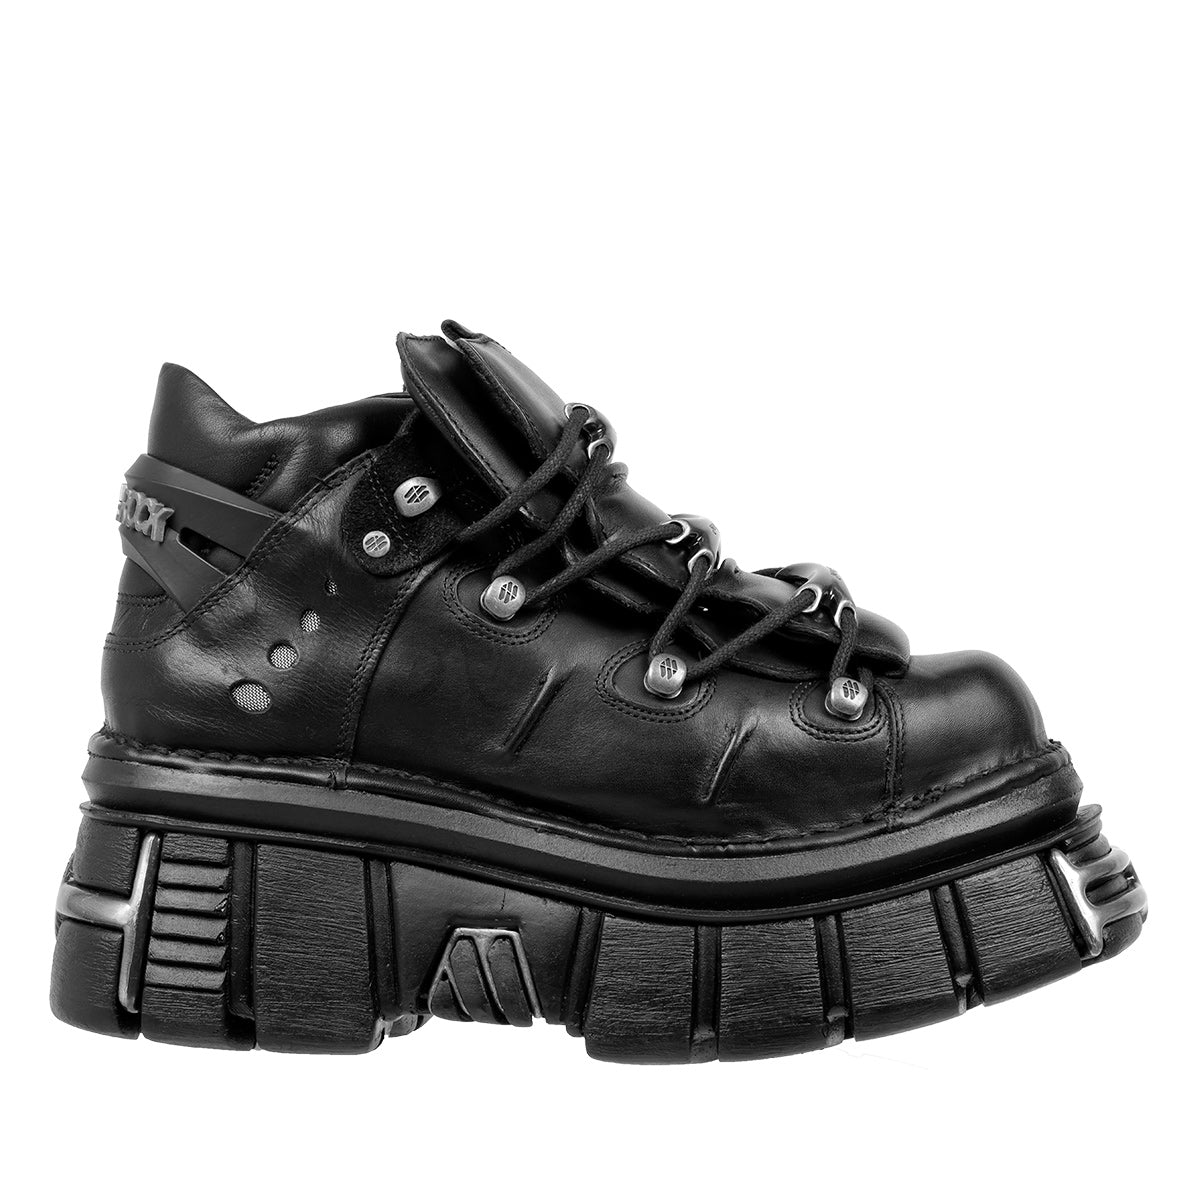 NEWROCK ( ニューロック ) - ANKLE BOOT BLACK TOWER WITH LACES M-106 